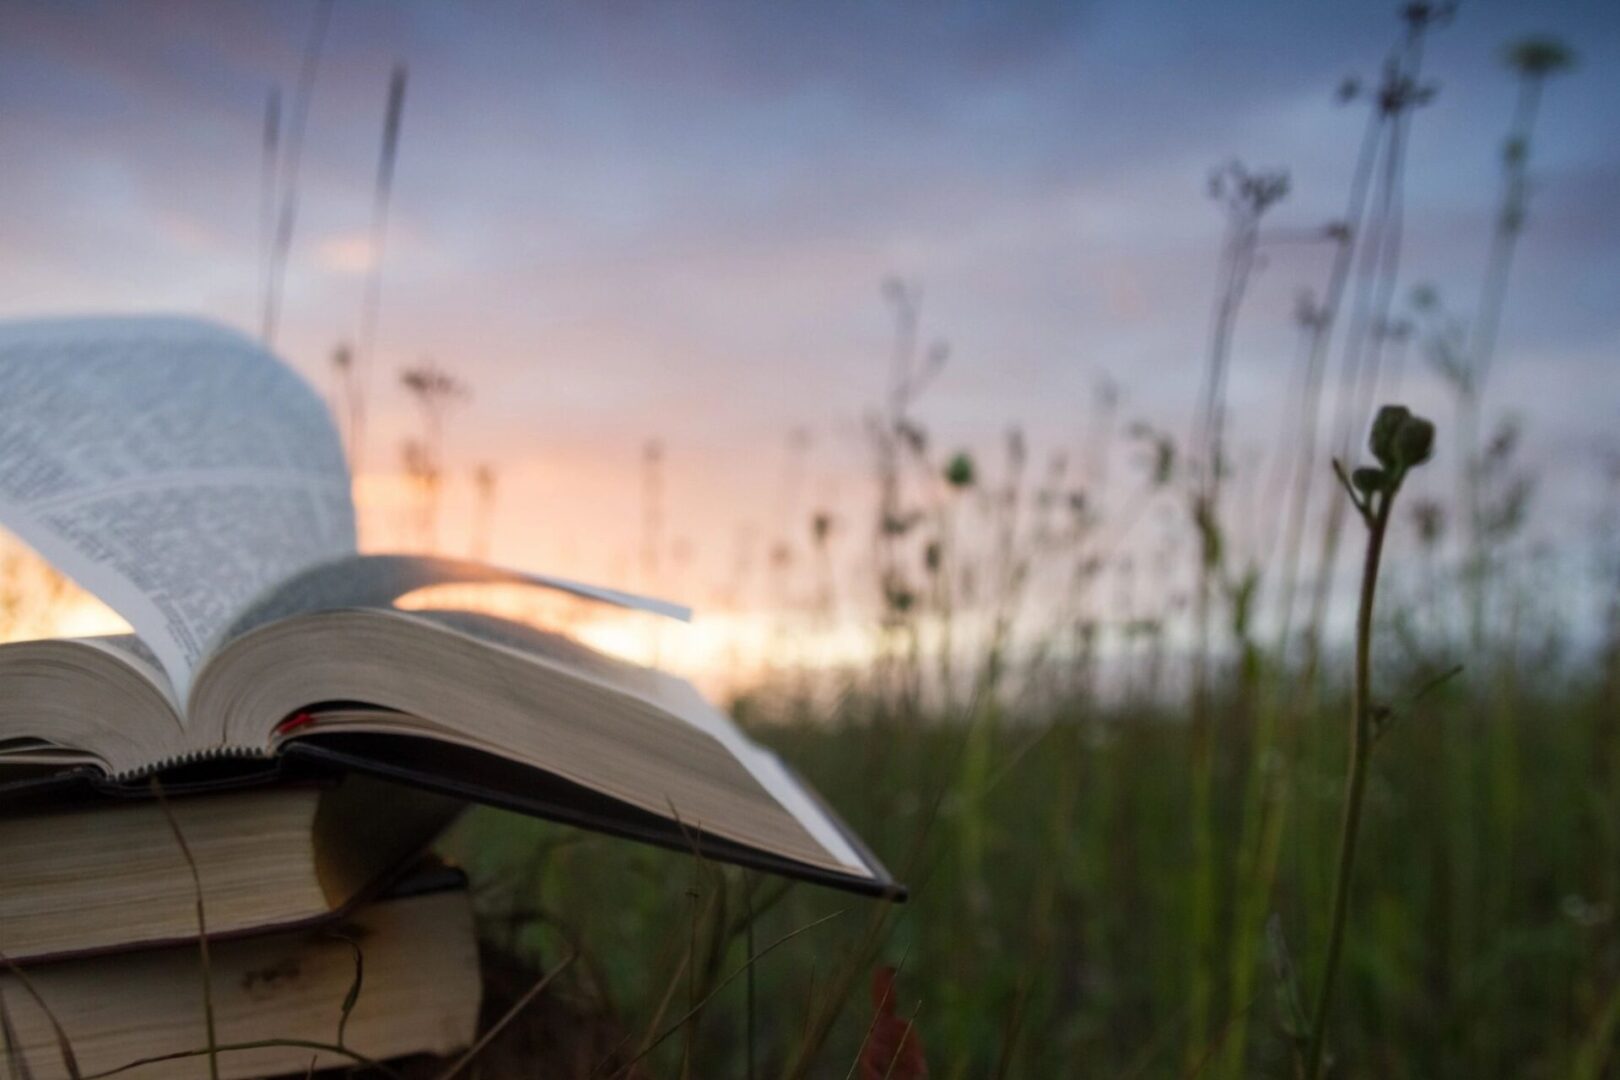 A book is open in the grass at sunset.